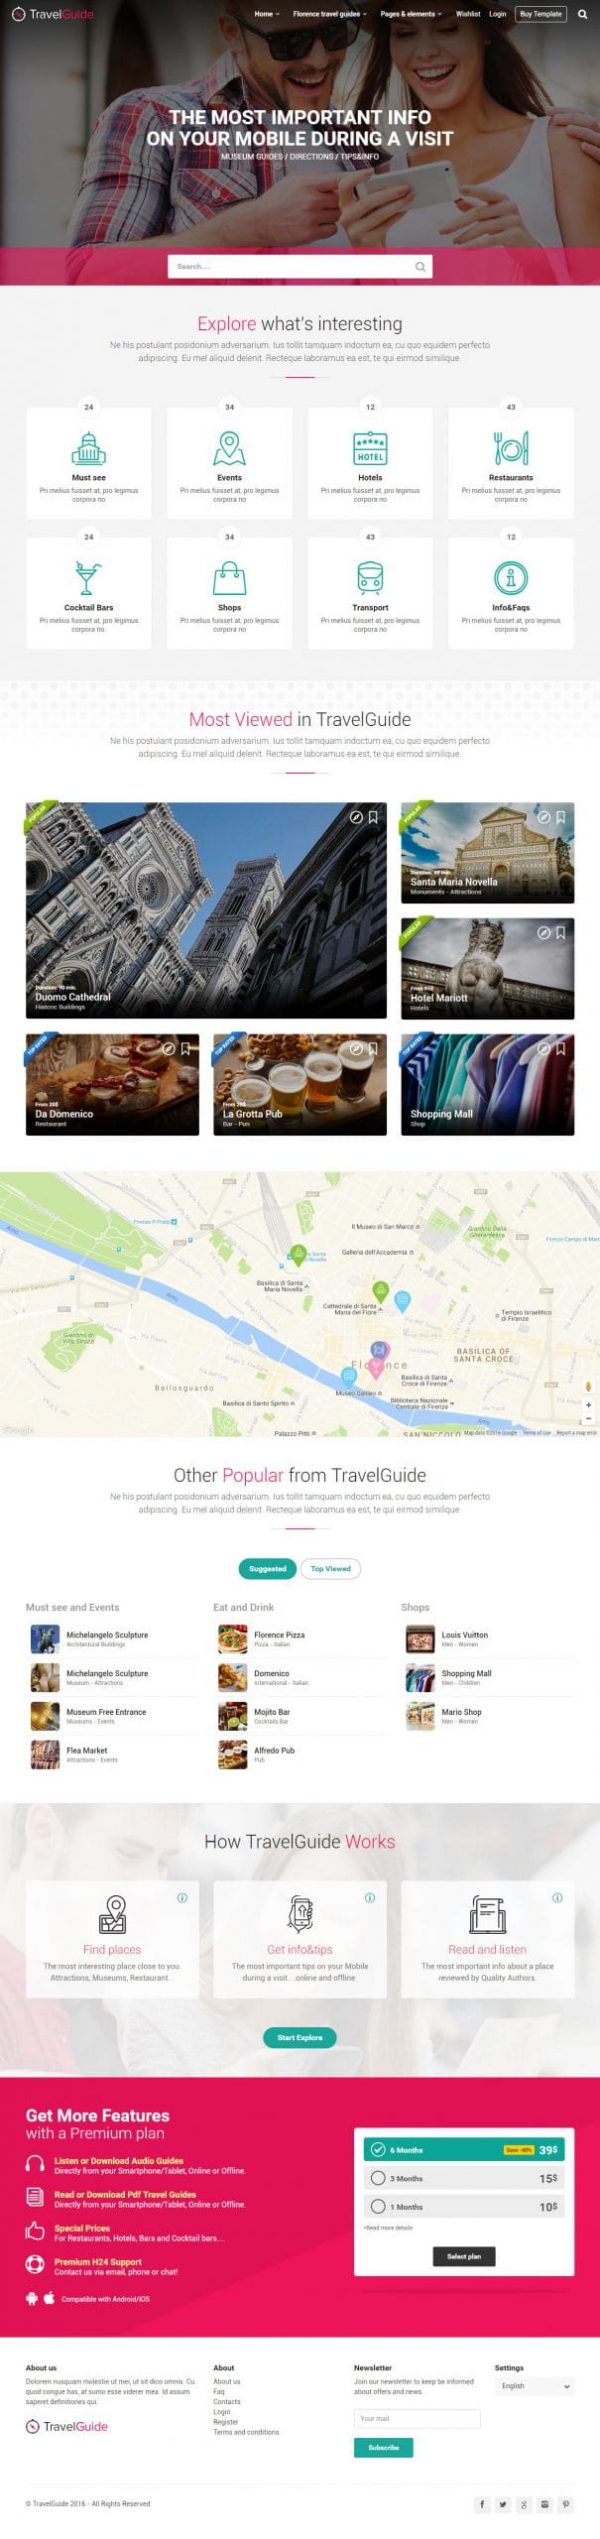 TravelGuide - Travel Guides, Places and Directions